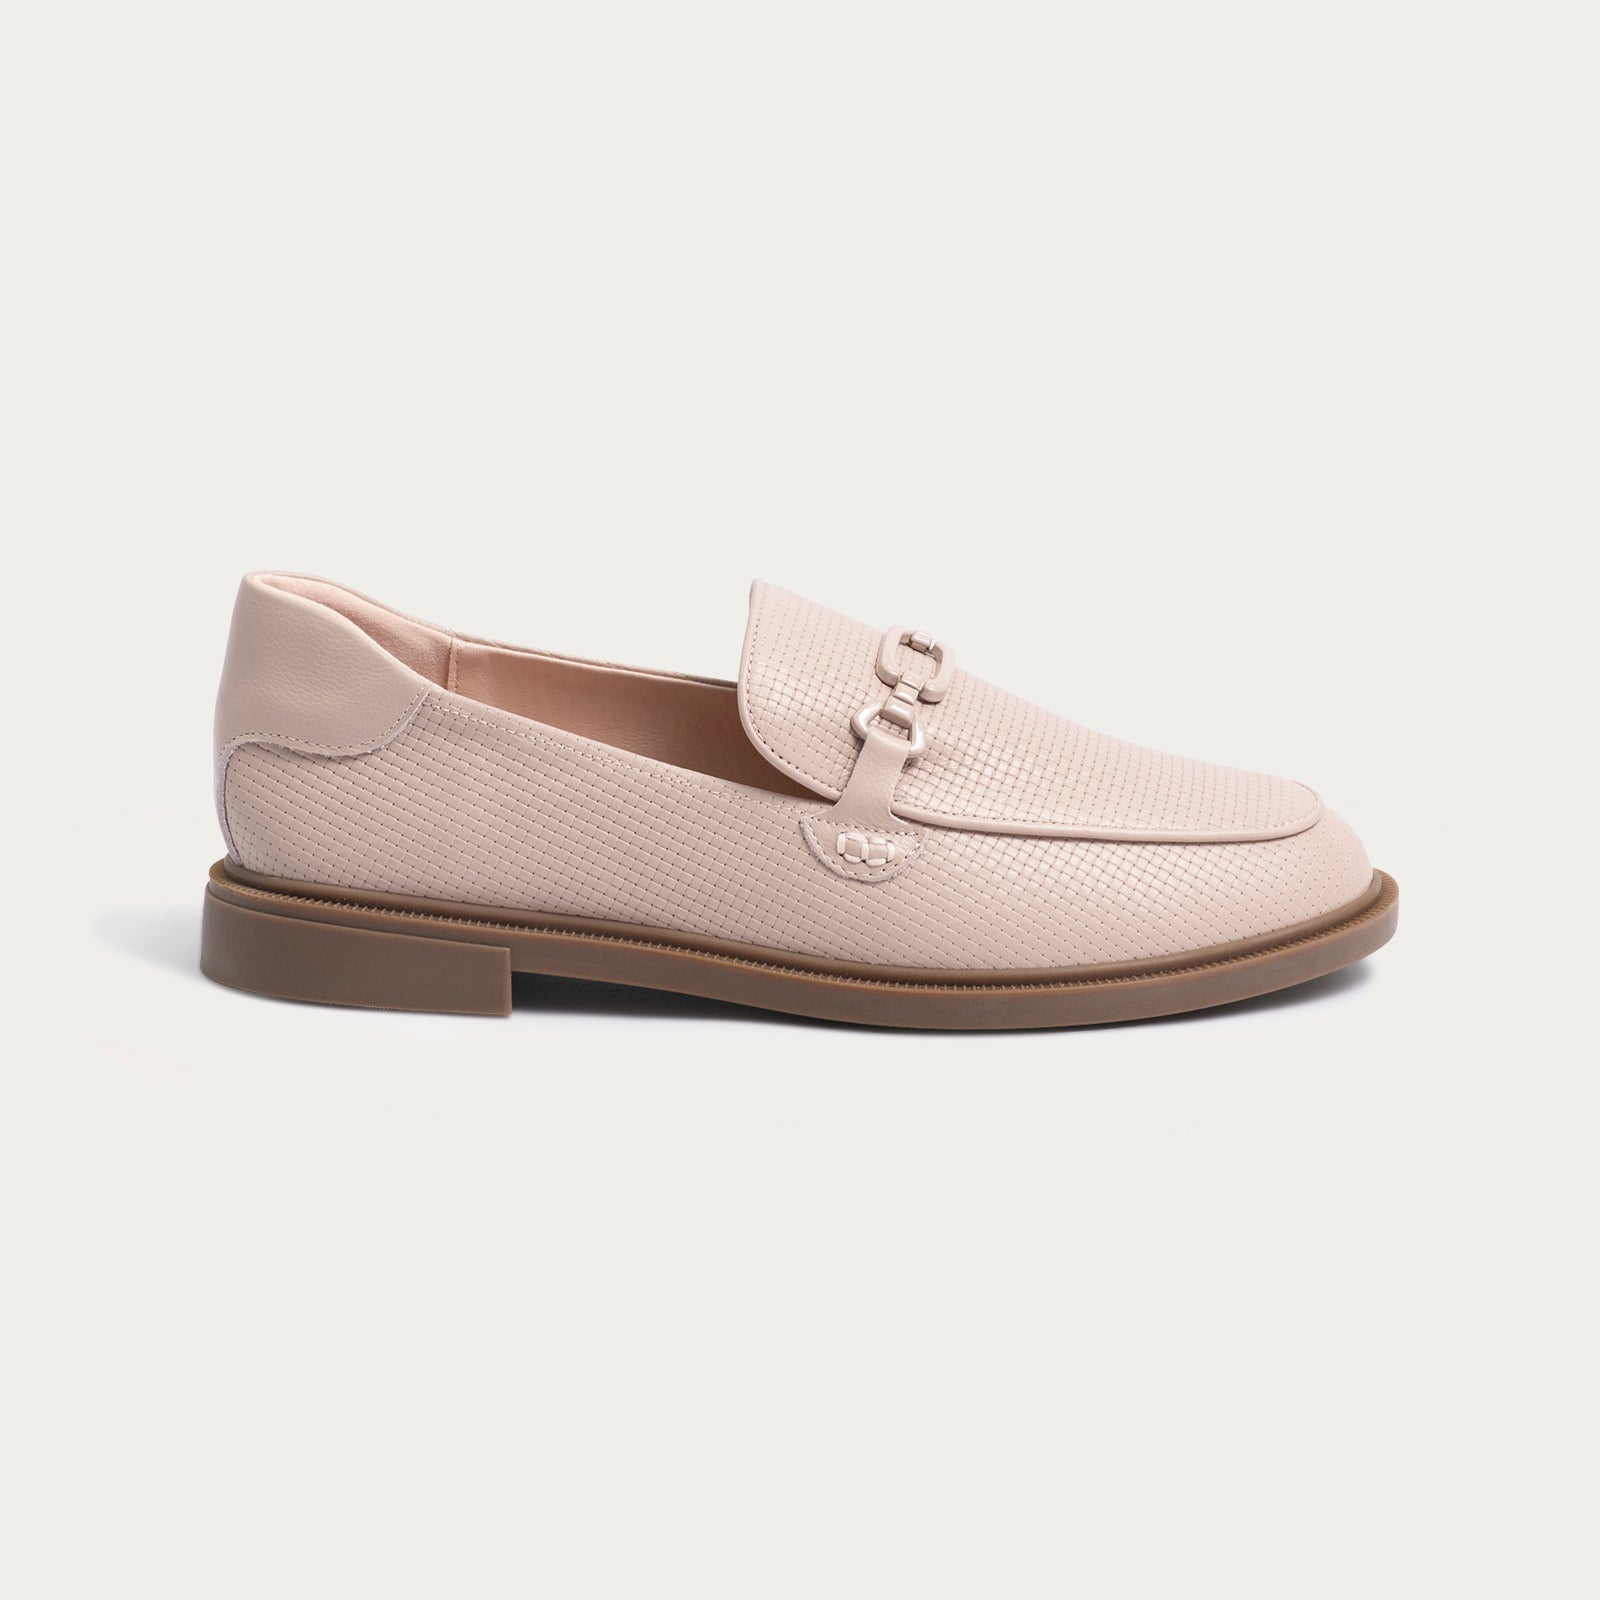 Noreen Loafers